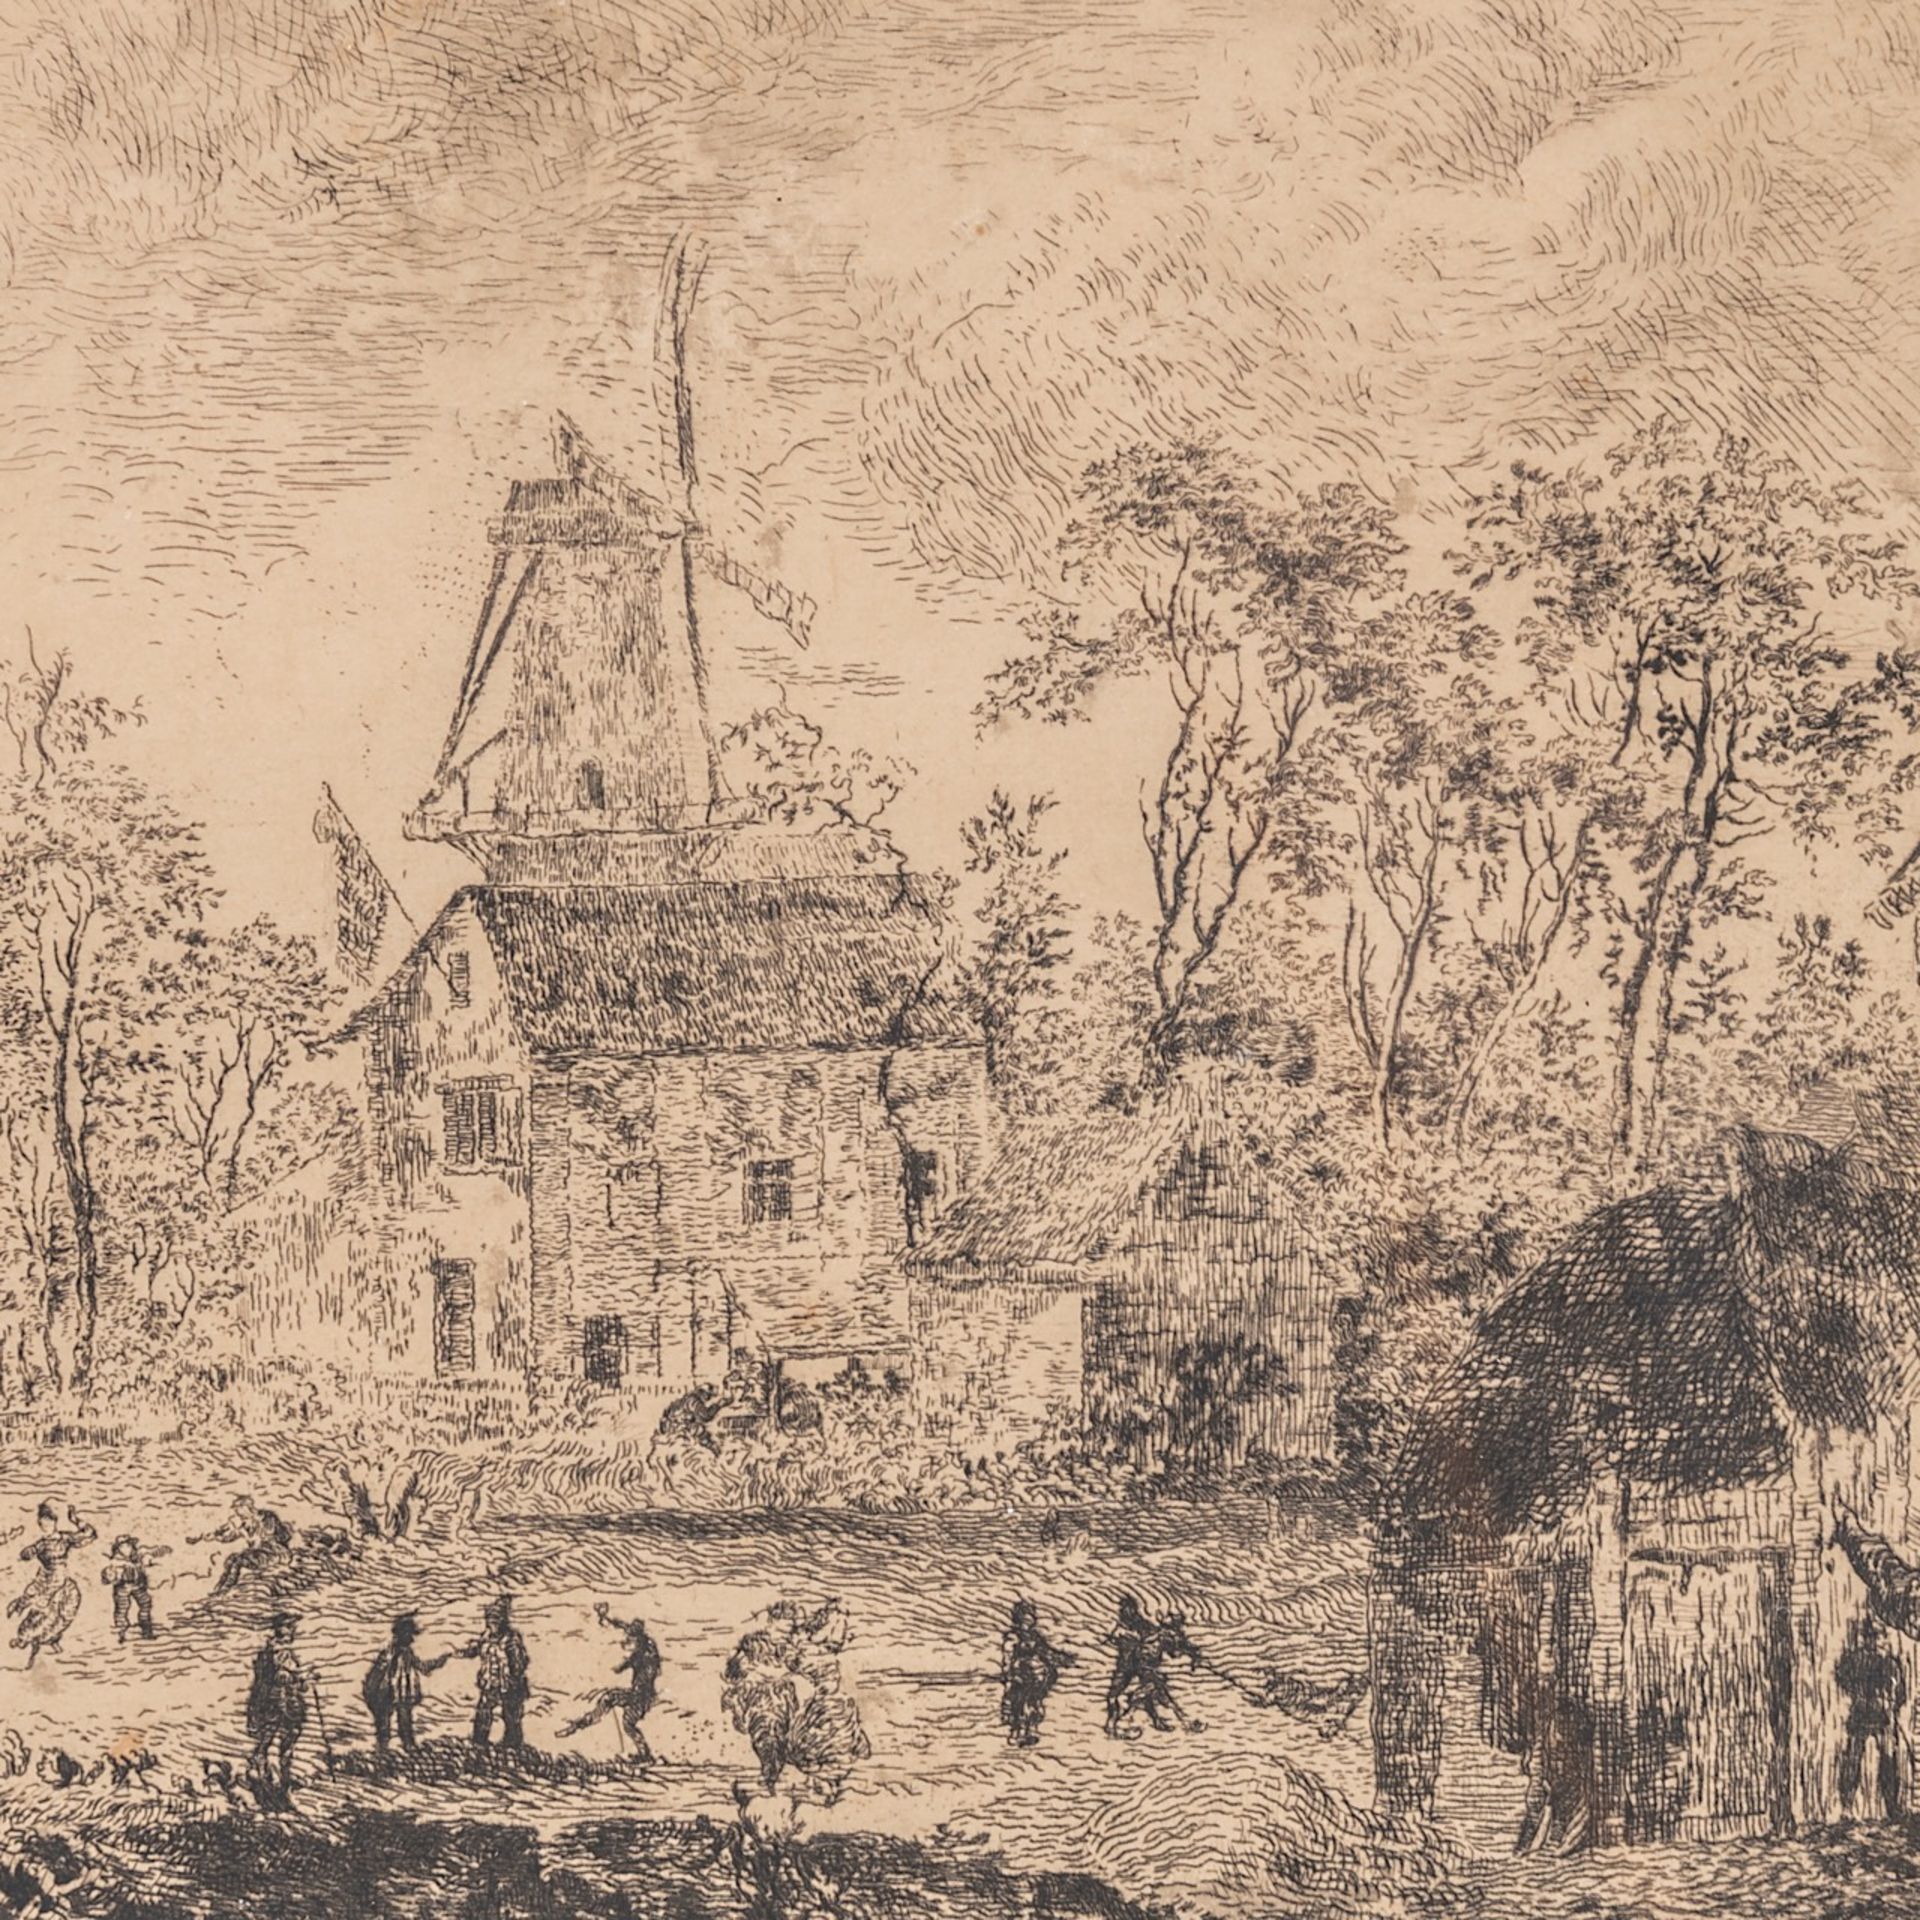 James Ensor (1860-1949), 'Village Fair at the Windmill' ('Kermesse au Moulin'), (1889), etching on s - Image 5 of 6